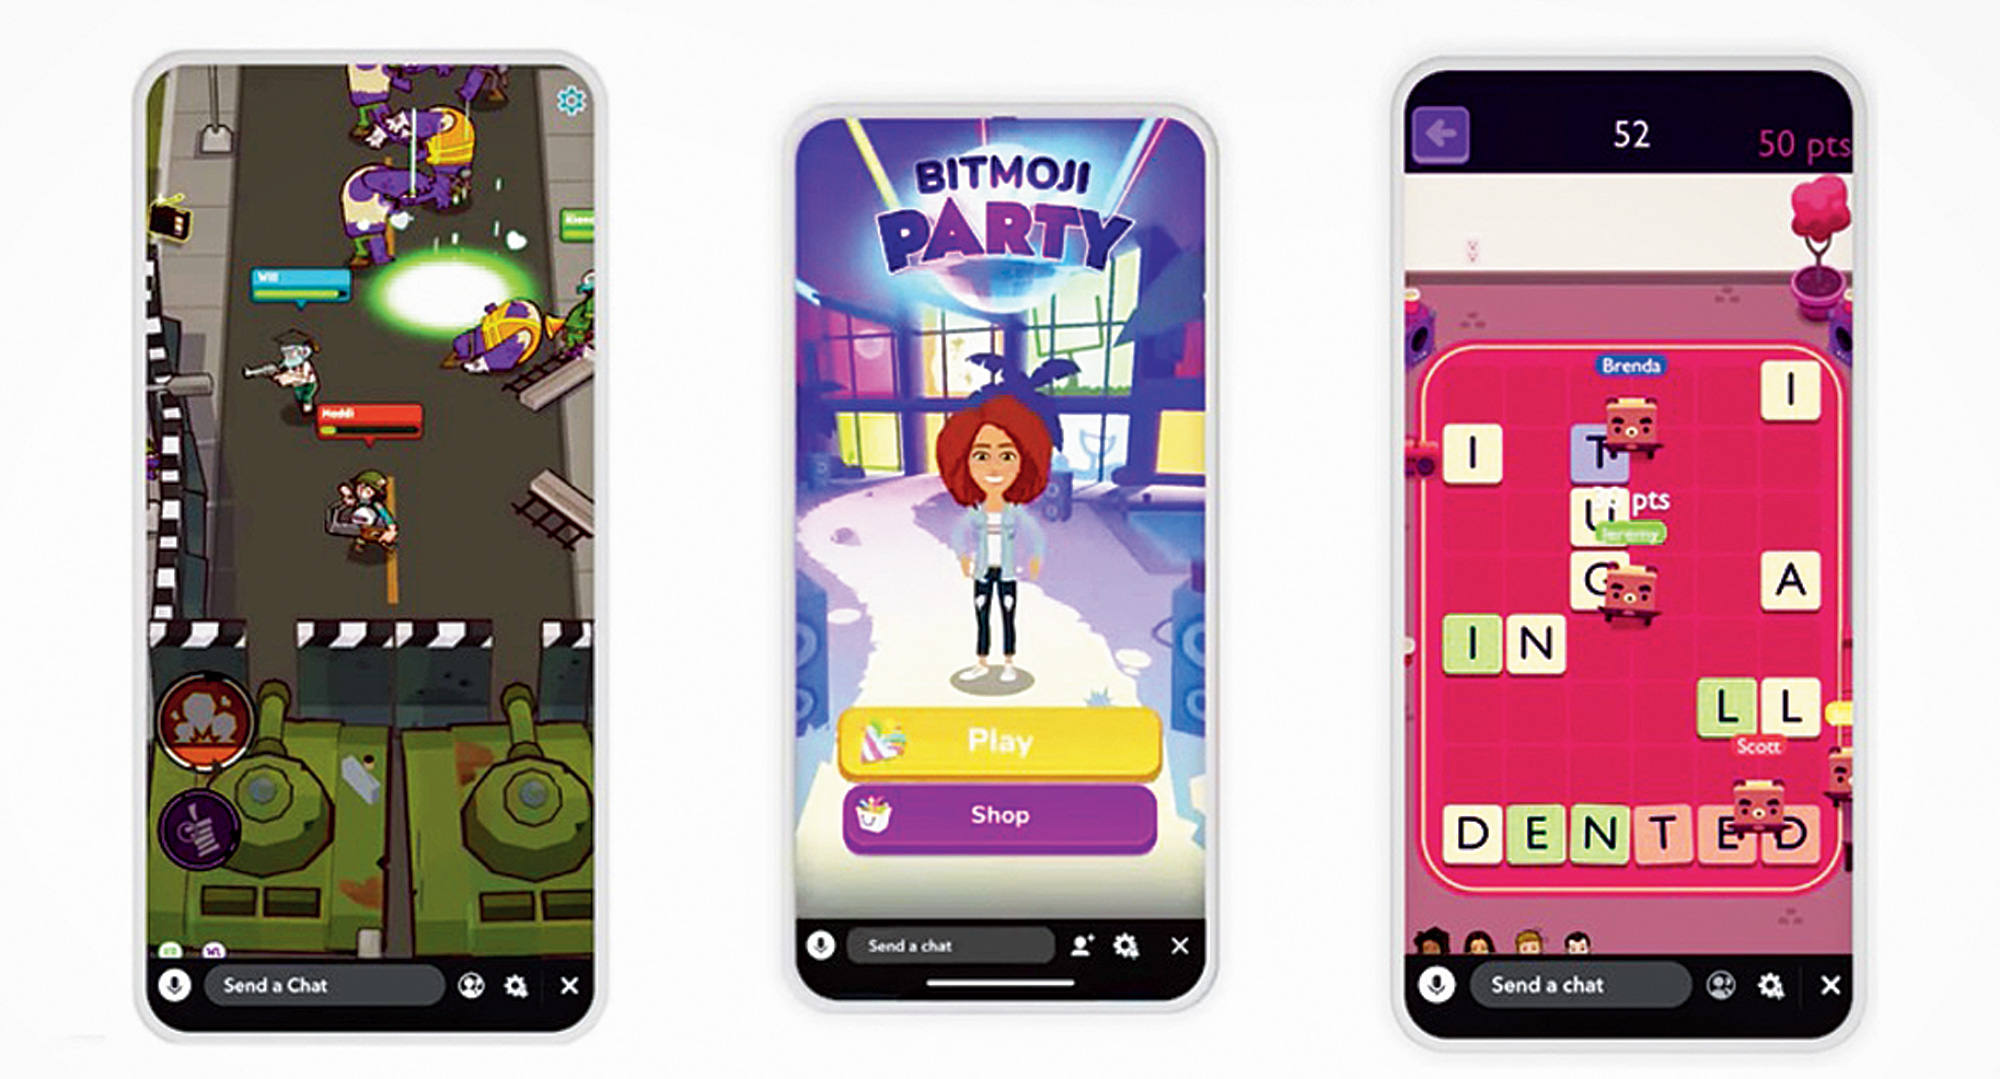 Friends can now choose from six game titles to play within Snapchat.